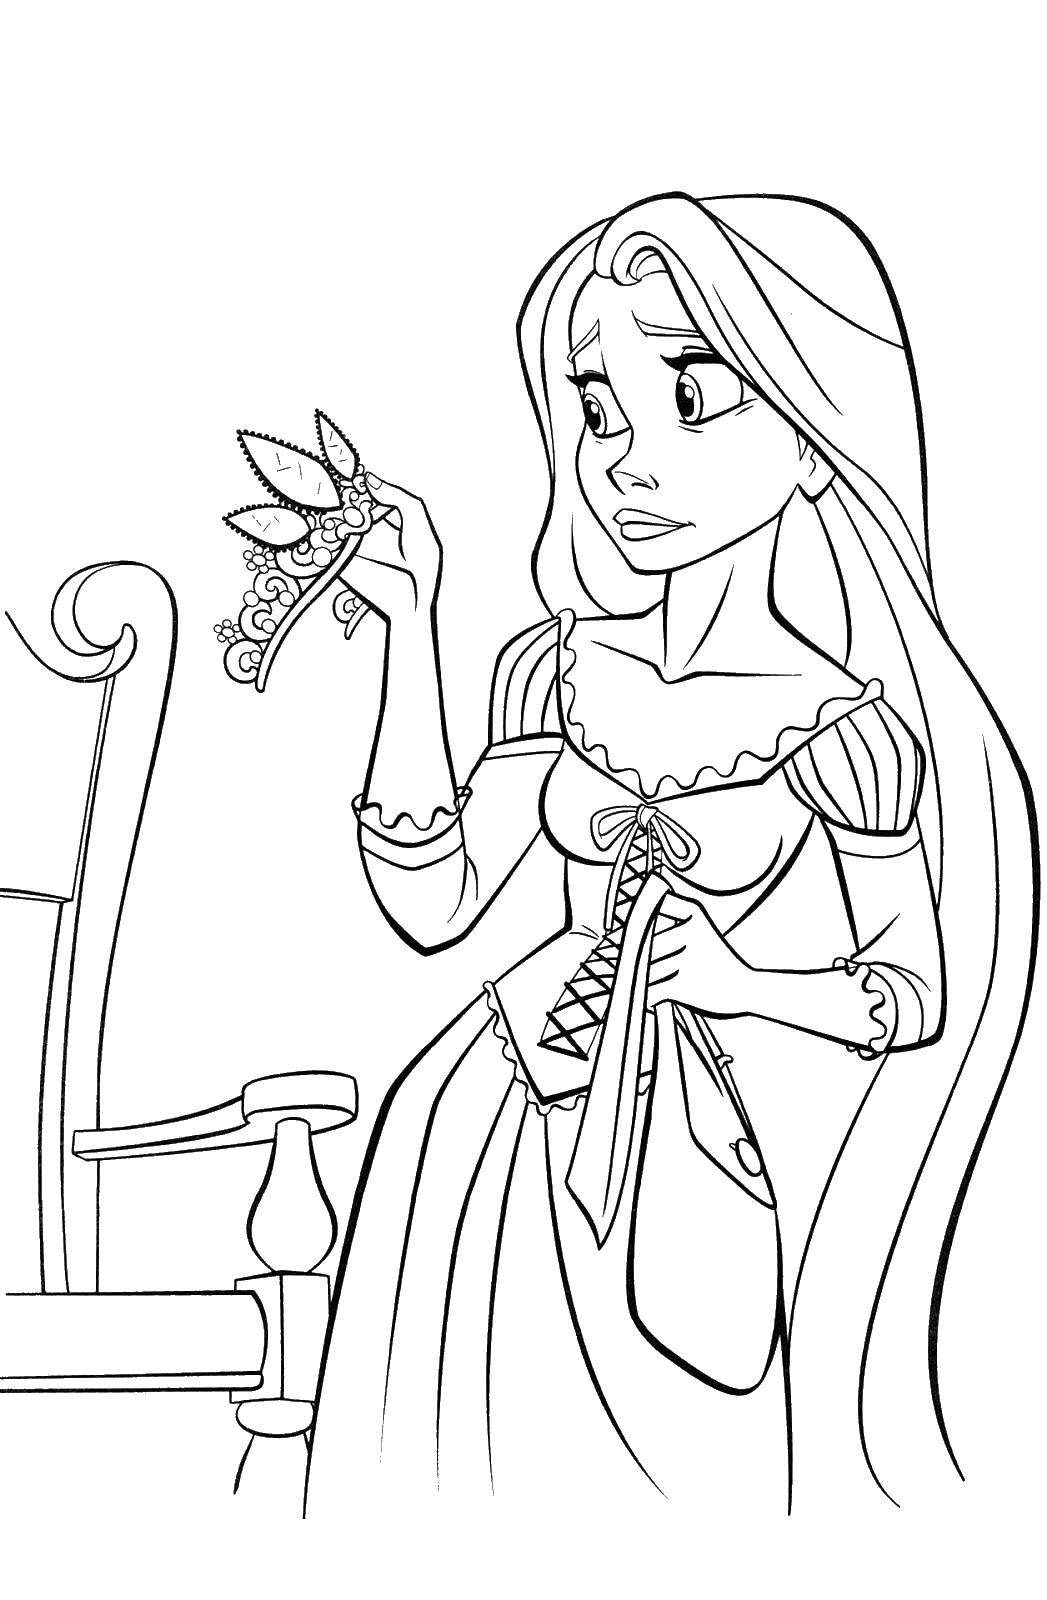 Coloring Rapunzel looks at the crown. Category coloring pages Rapunzel tangled. Tags:  Rapunzel, crown.